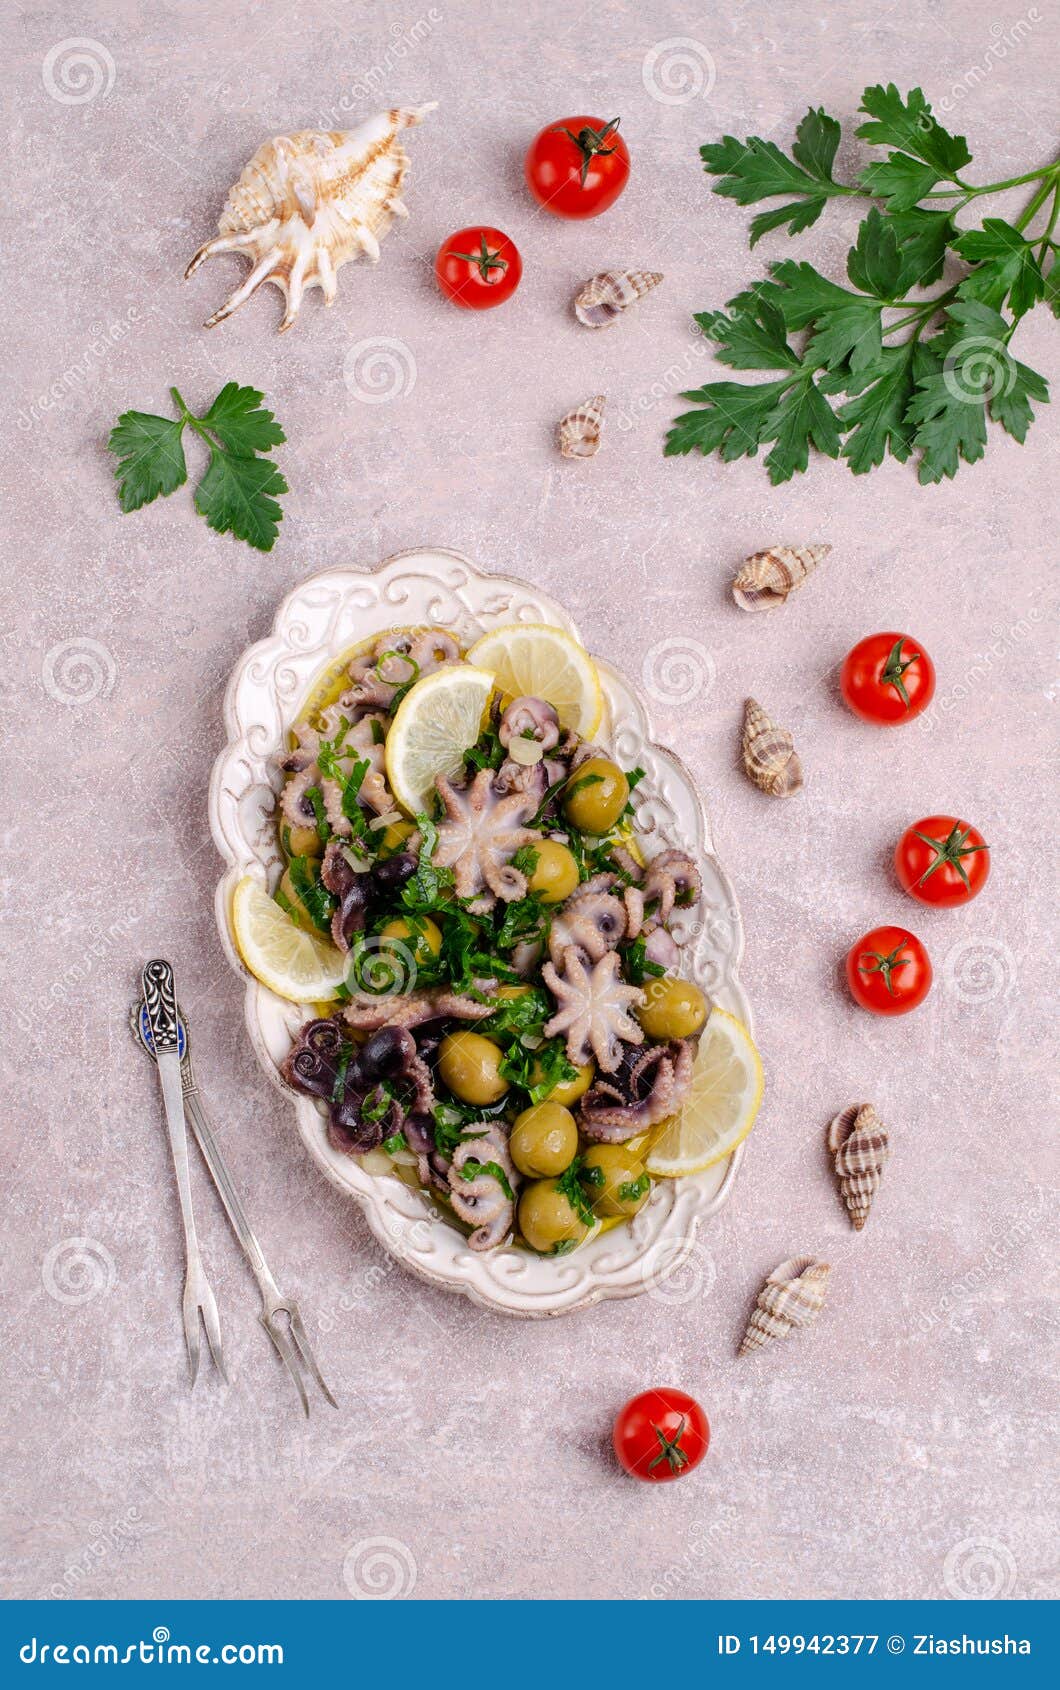 Baby Octopus in Spicy Dressing Stock Image - Image of cooked ...